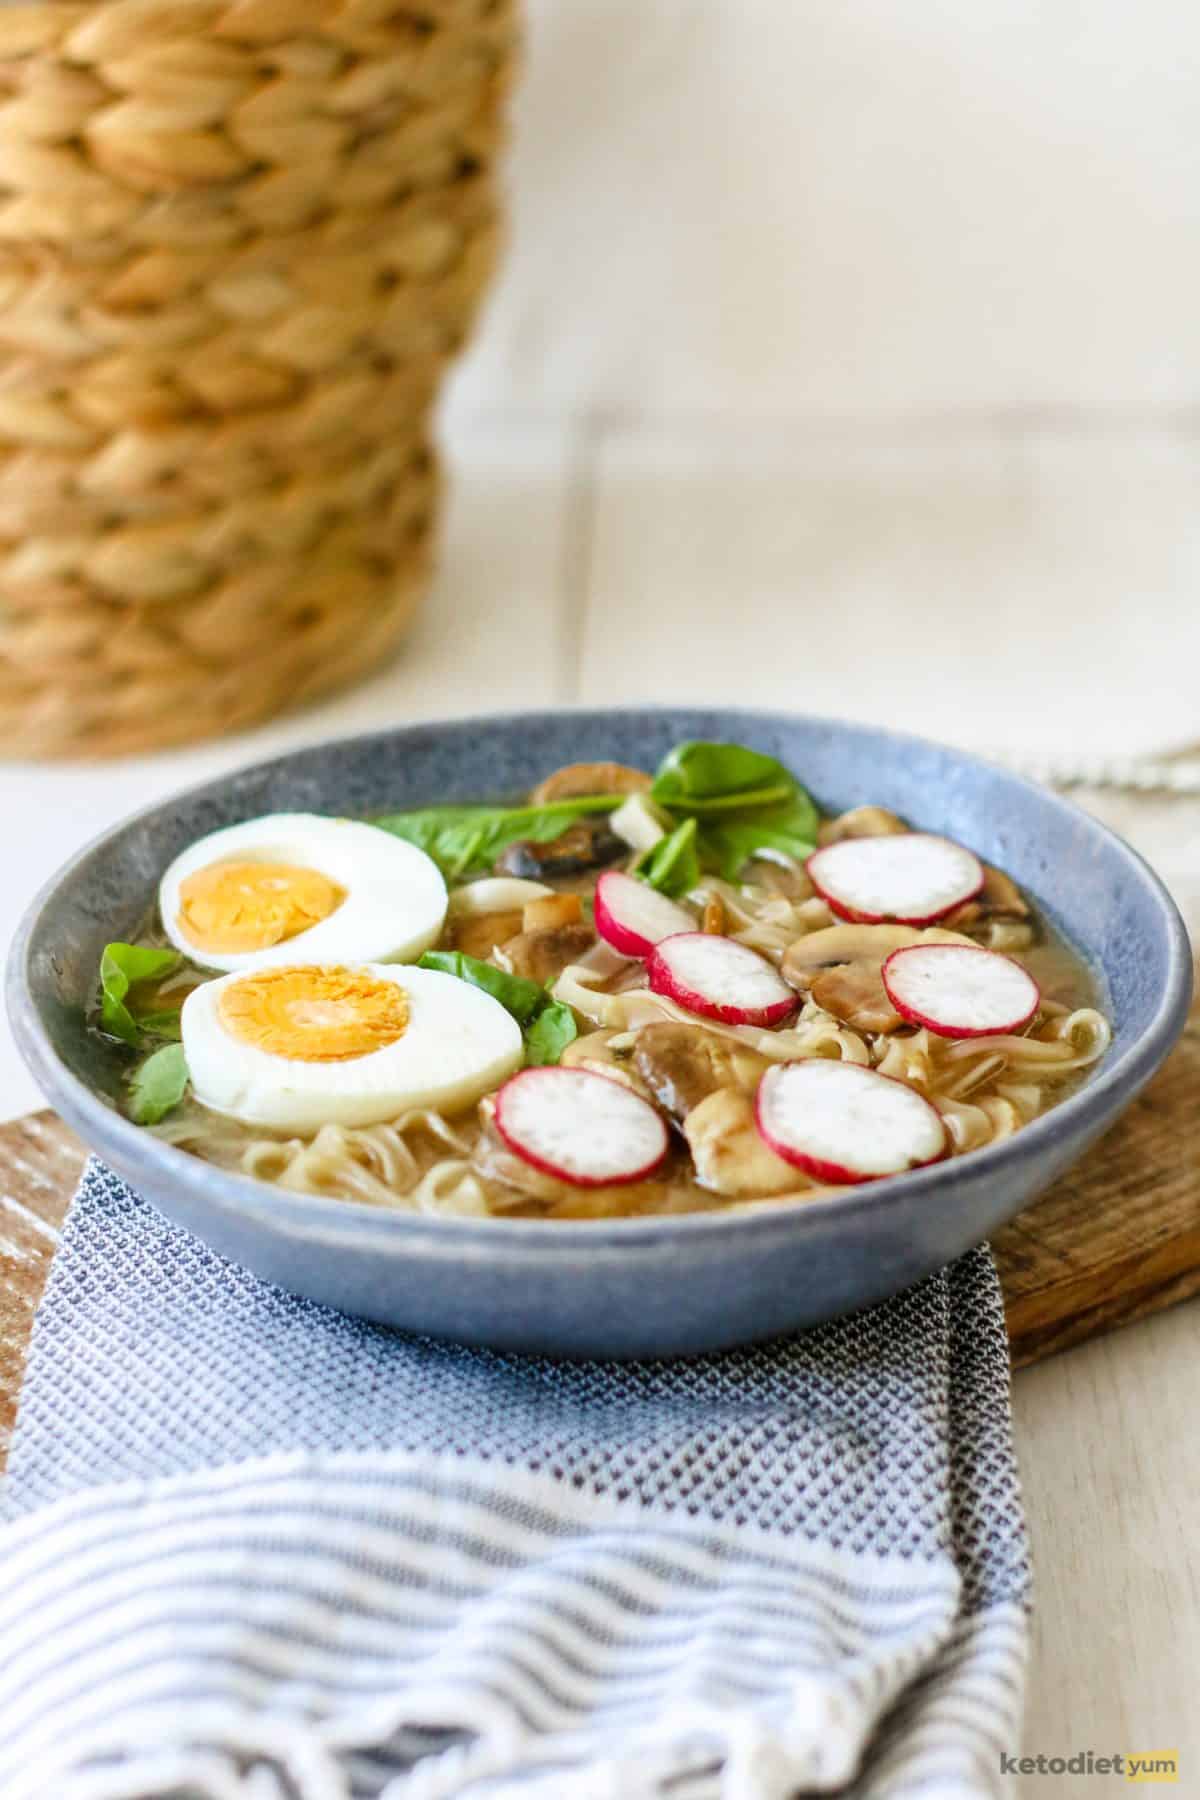 A delicious bowl of keto ramen noodle soup made with shirataki noodles, spinach and mushrooms and topped with sliced egg and radish